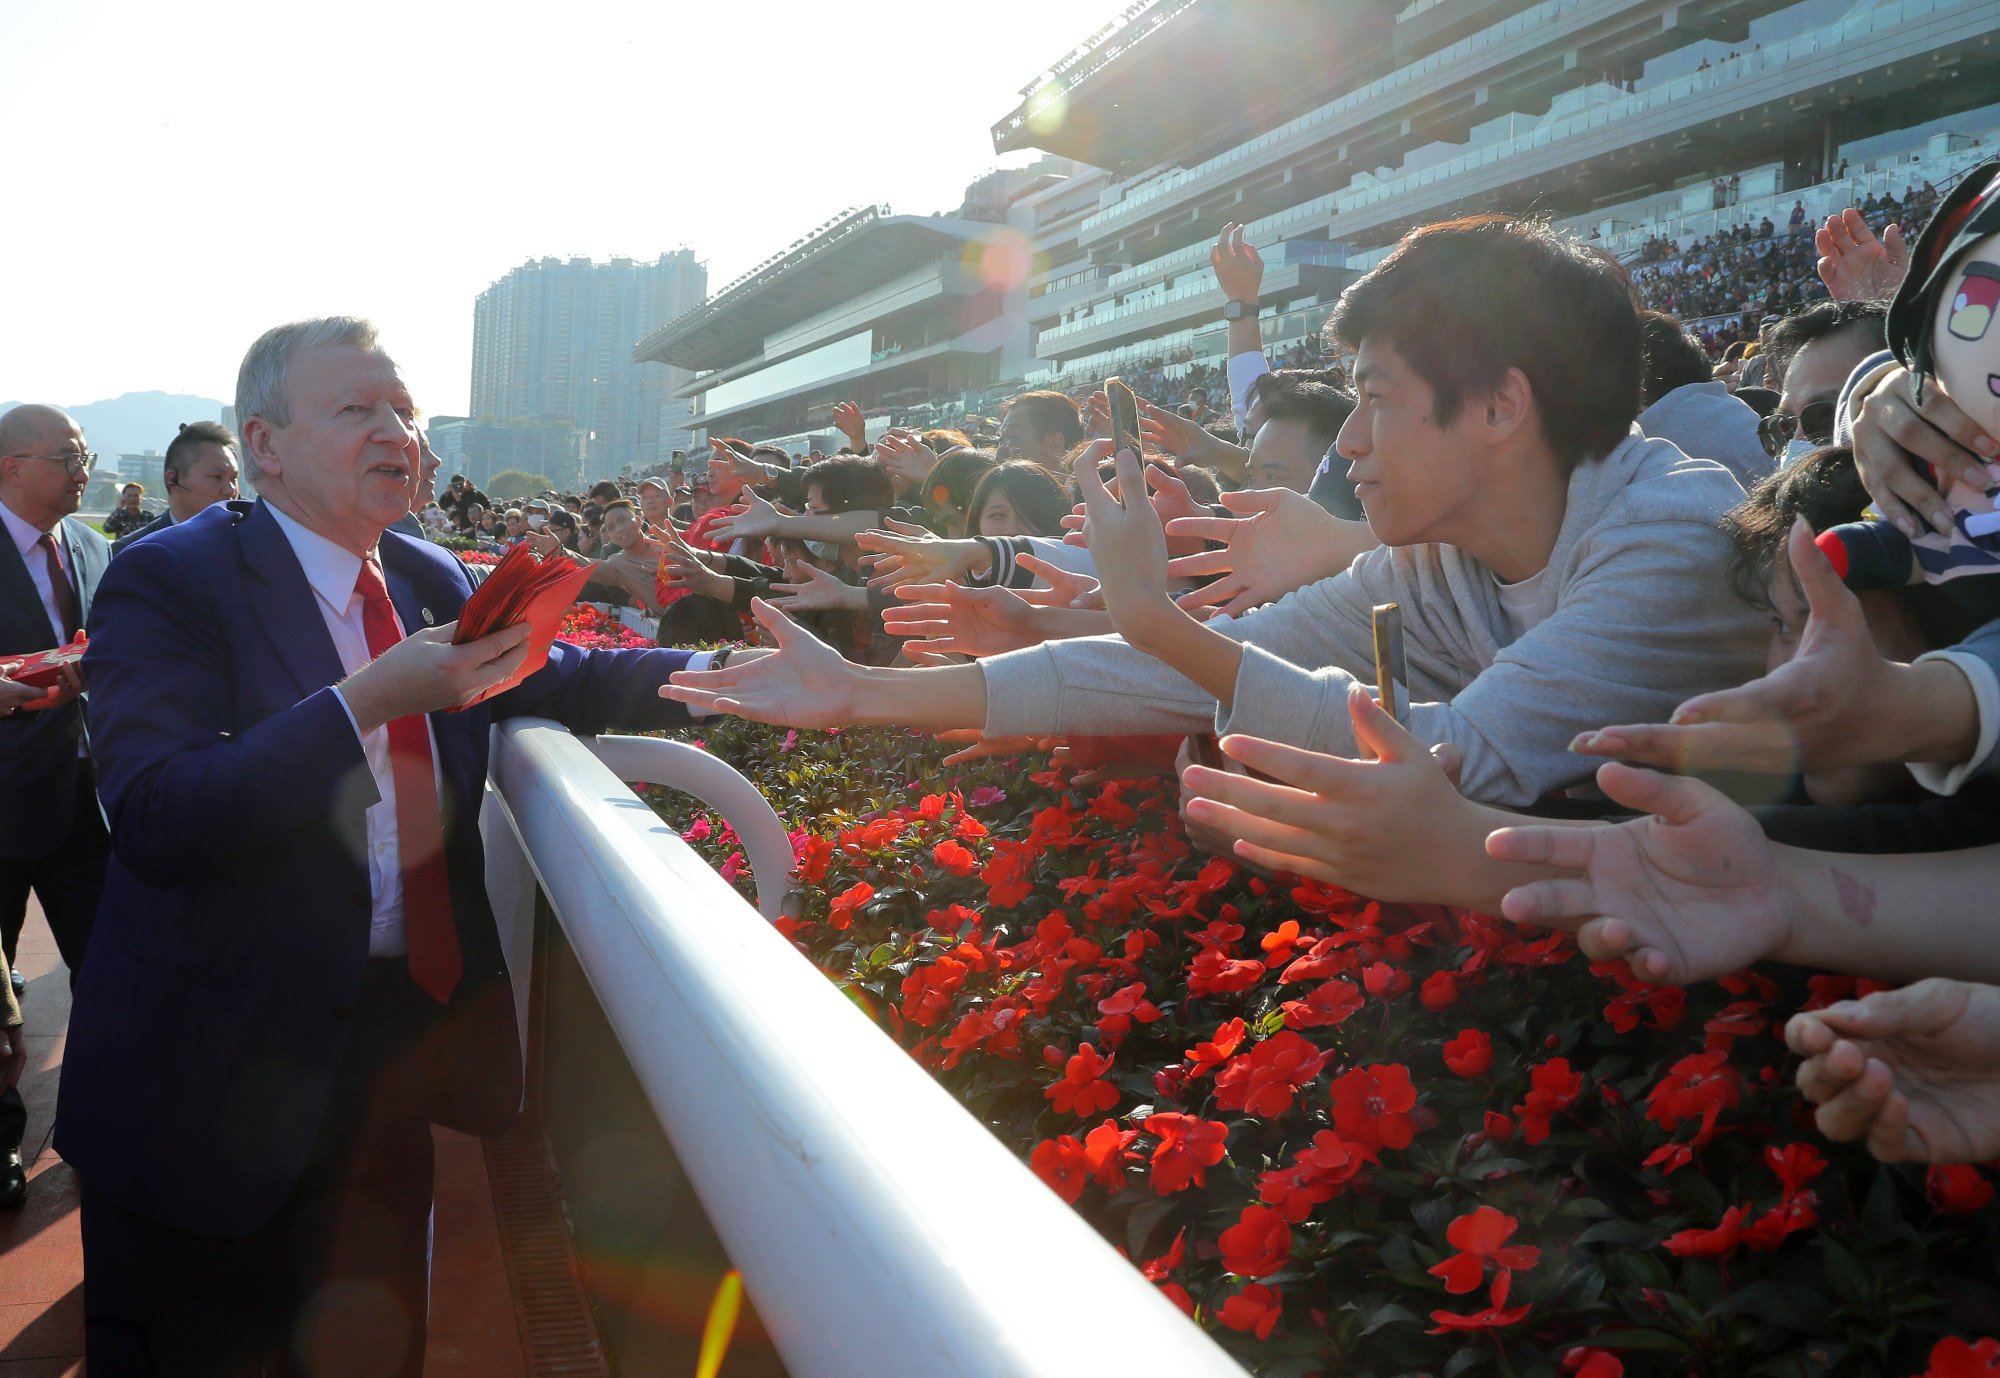 Jockey Club chief executive Winfried Engelbrecht-Bresges greets fans at Sha Tin racecourse during the Chinese New Year race day.